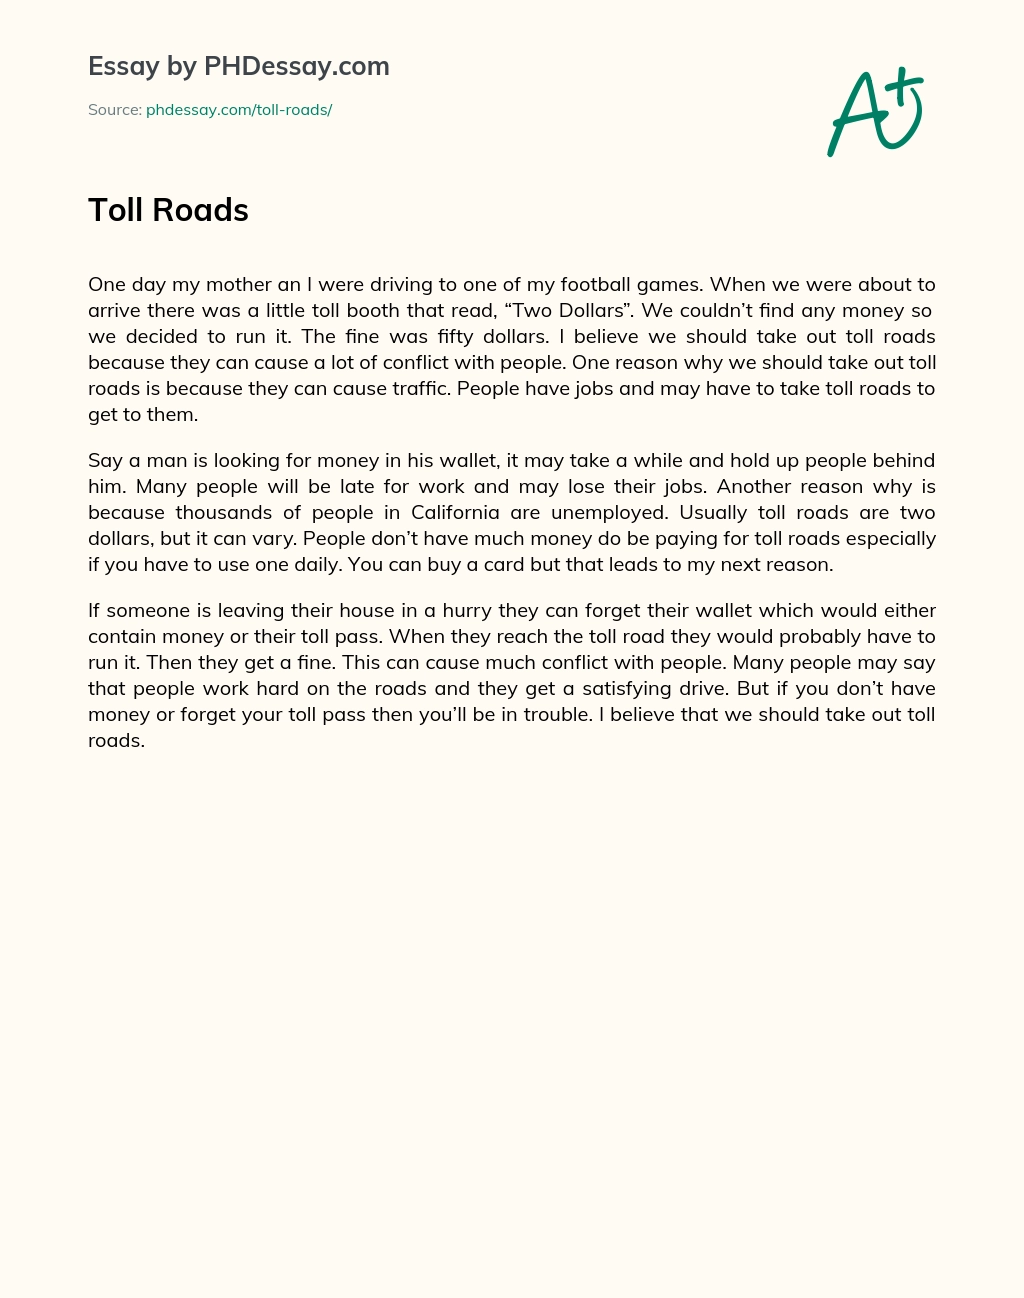 The Negative Impact of Toll Roads on People and Society essay